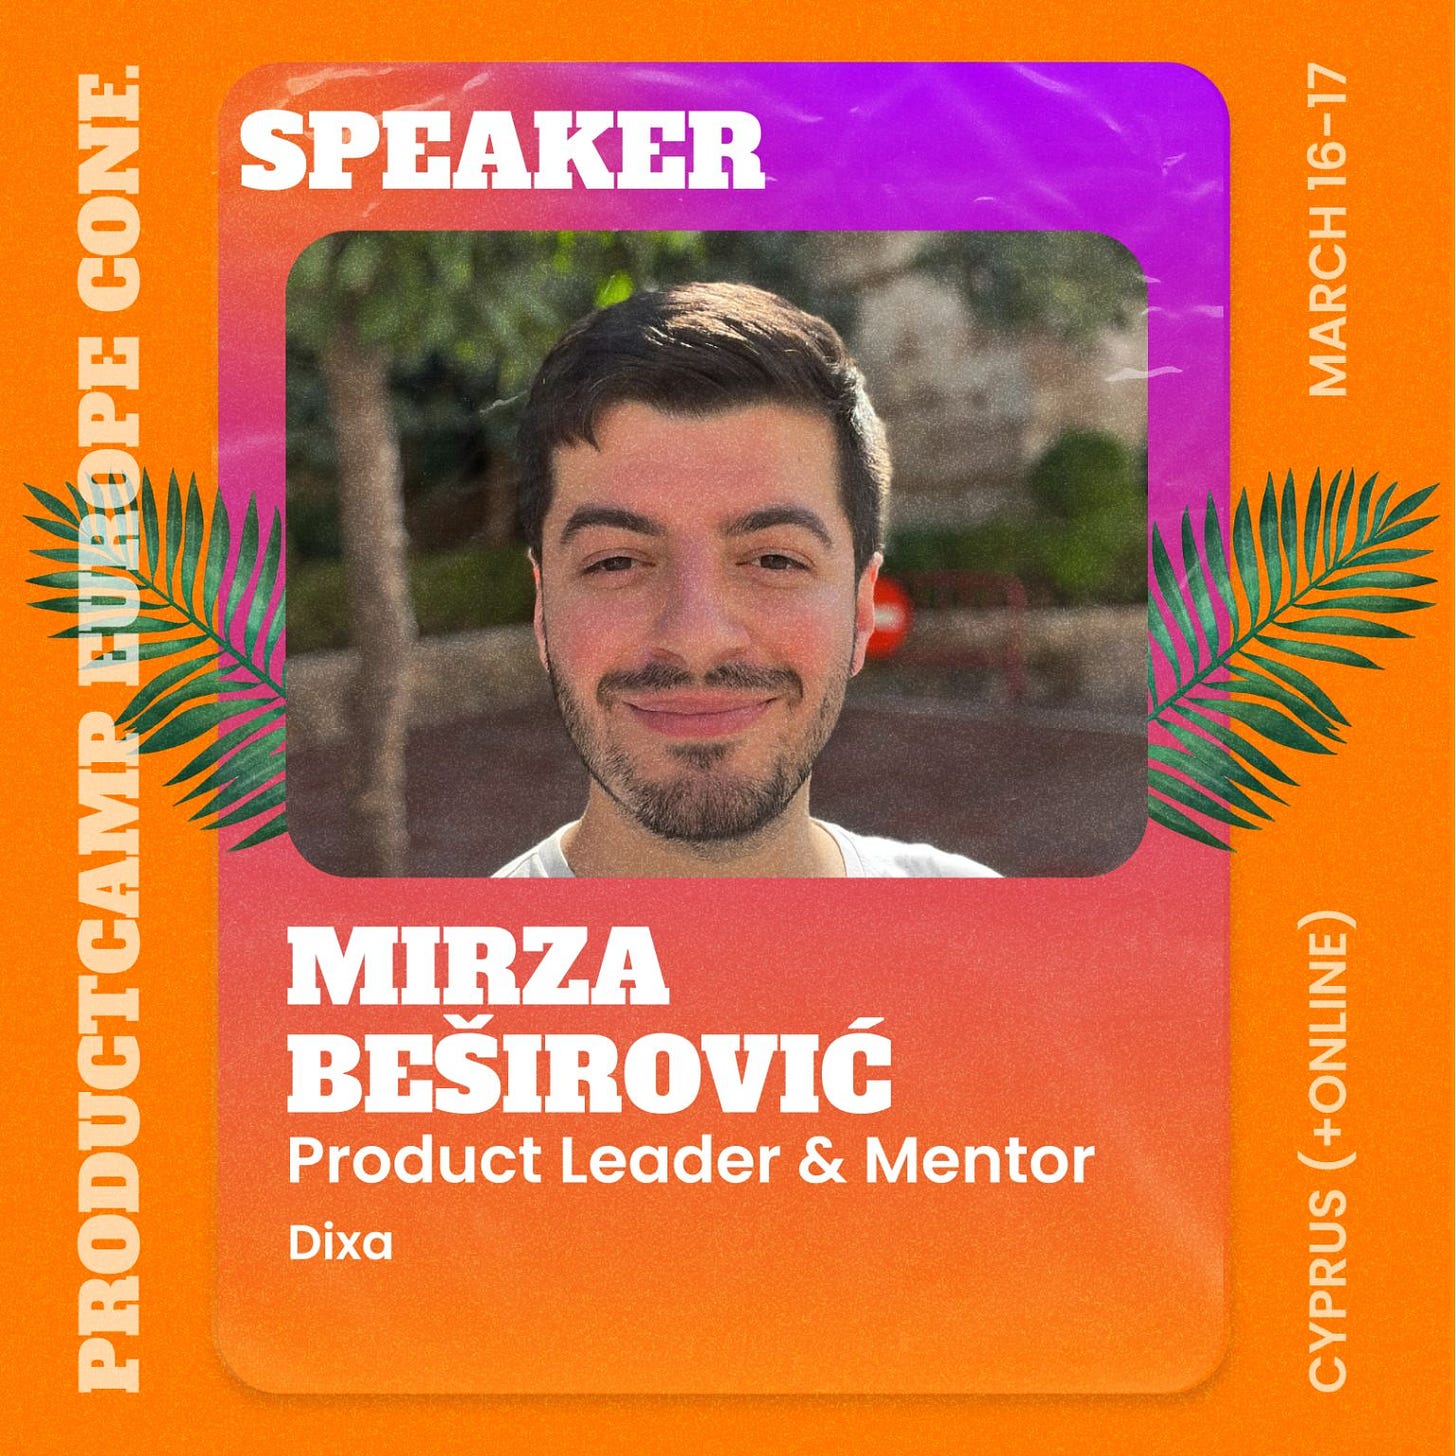 ProductCamp Europe Conference, speaker, Mirza Besirovic, Product Leader and Mentor, Dixa. March 16-17, Cyprus (+online)